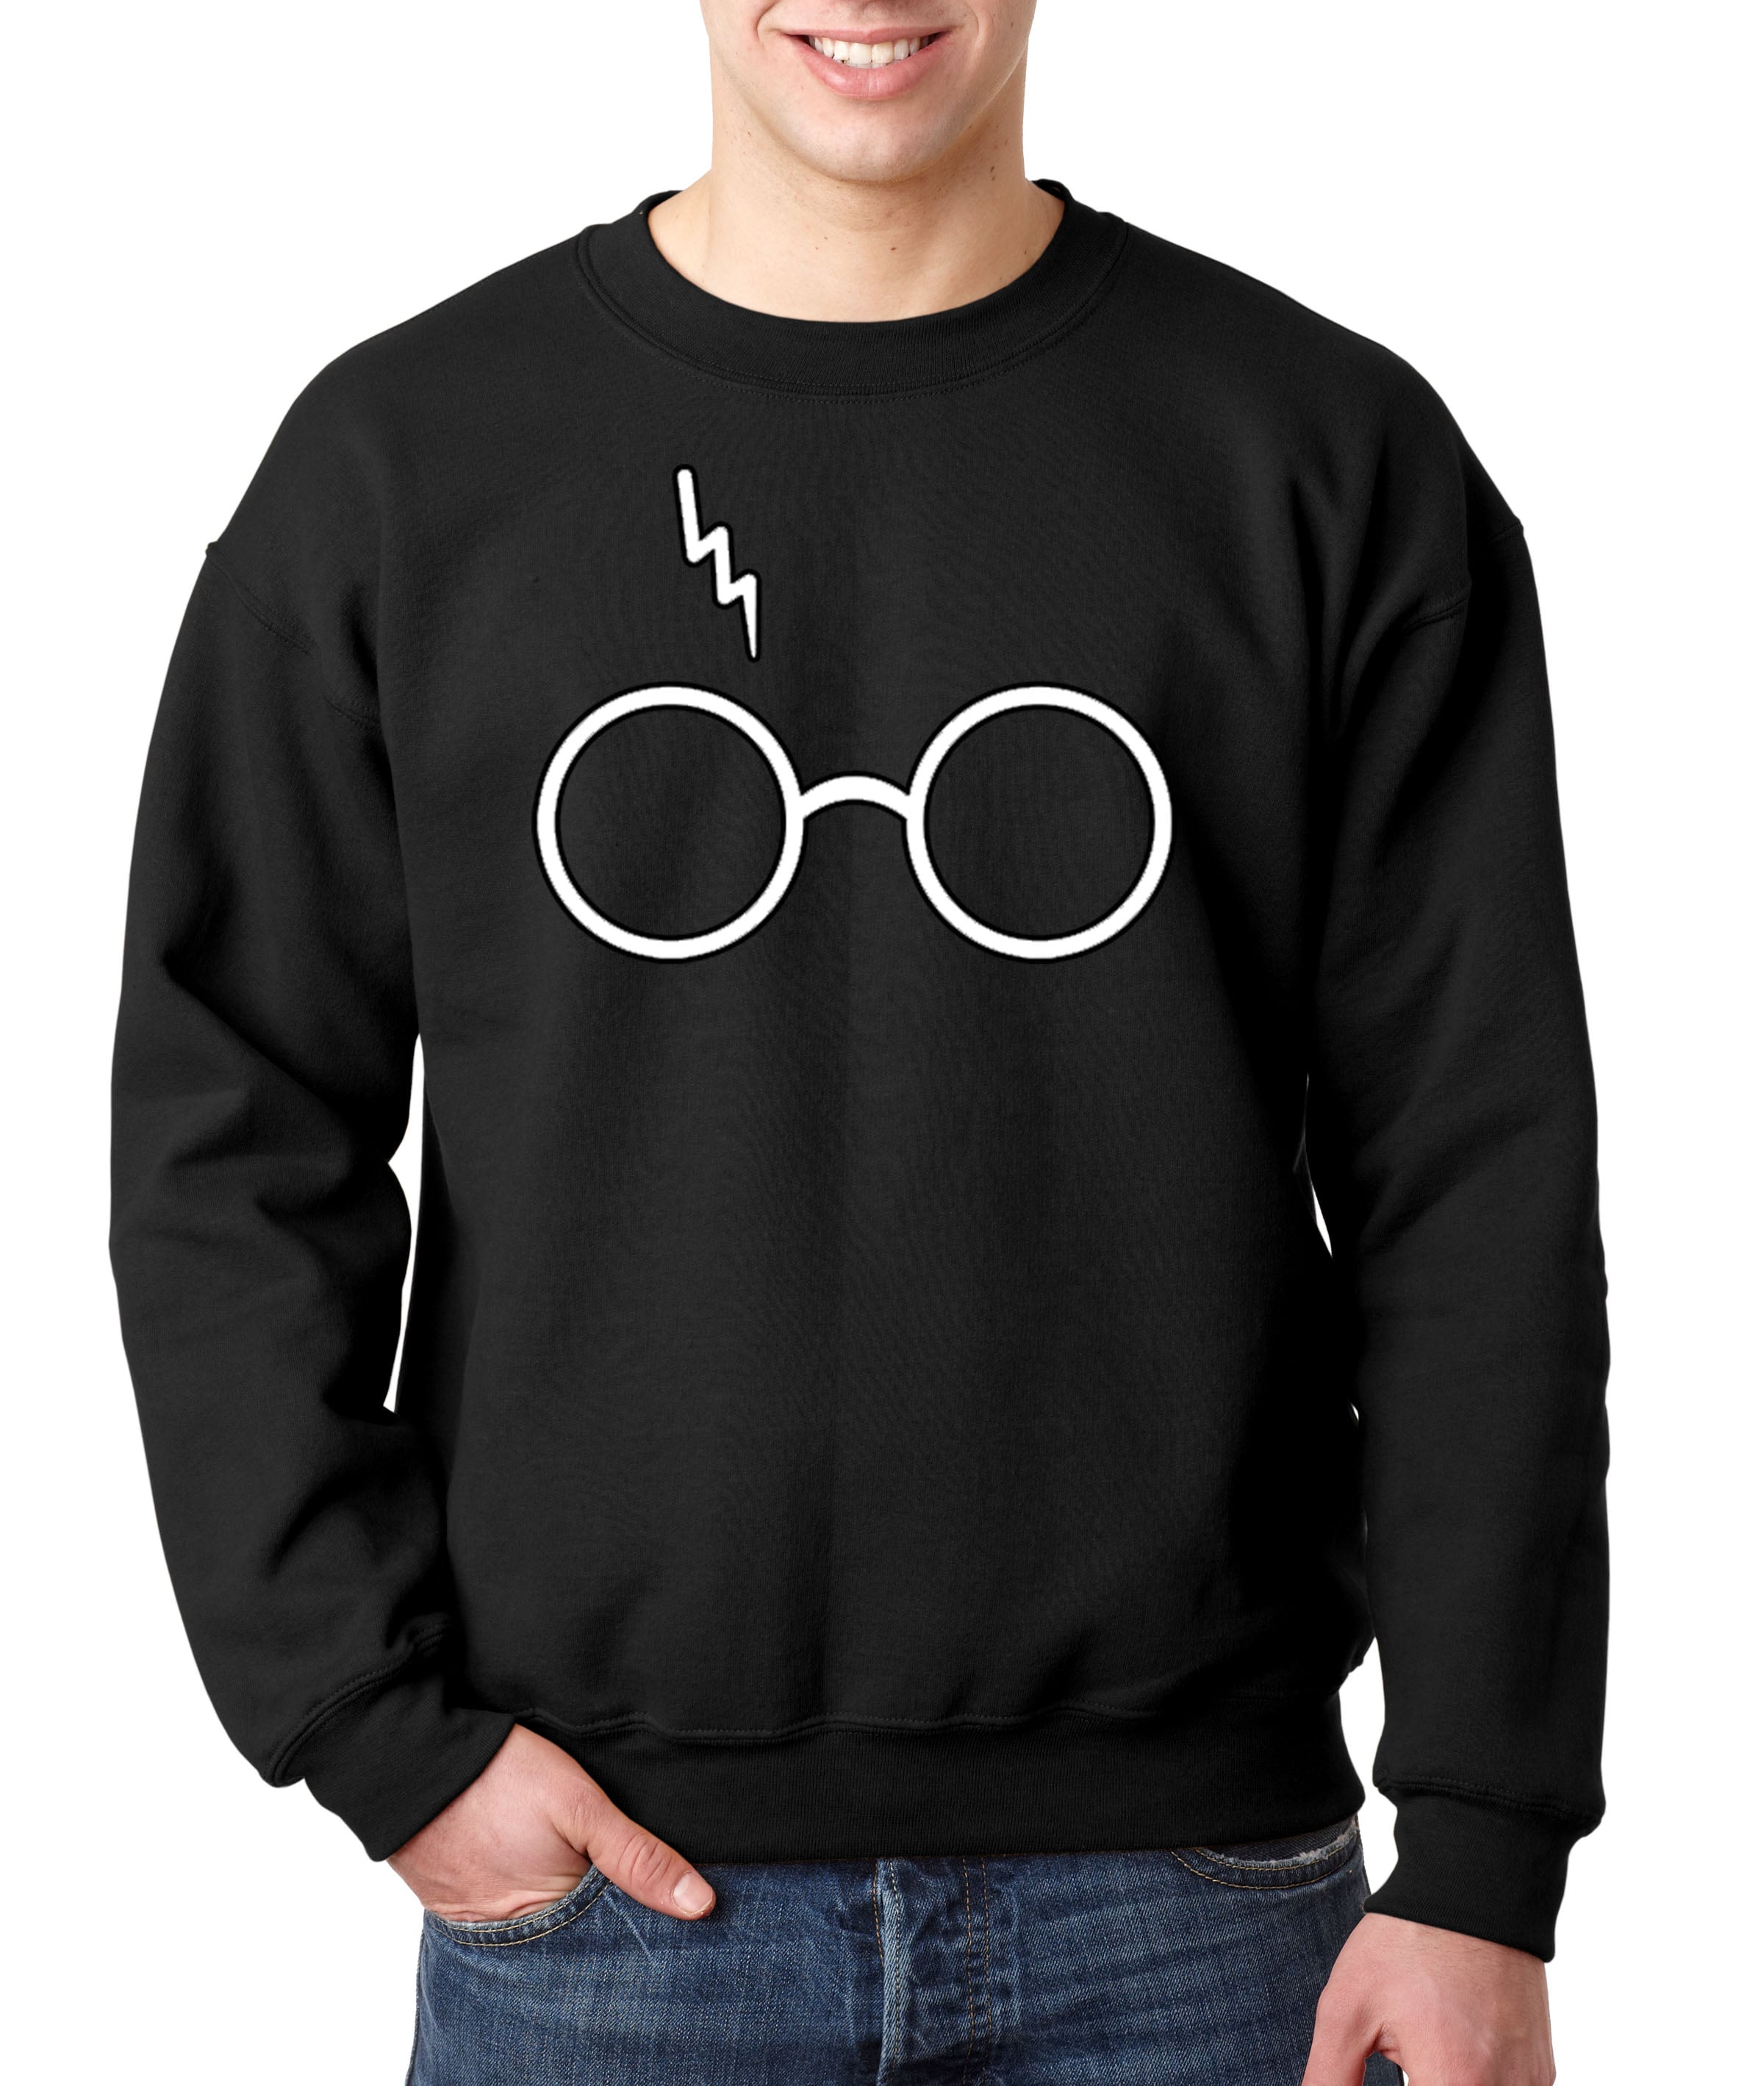 Harry Potter Gifts for Teens